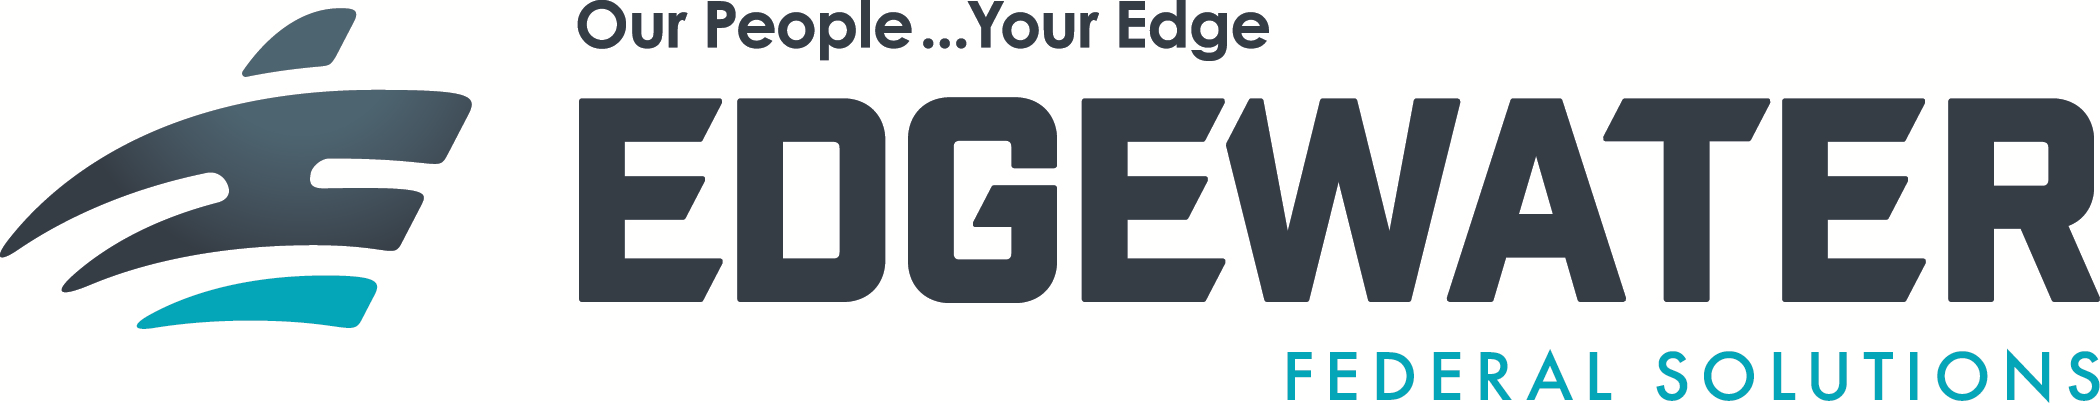 Edgewater Federal Solutions Company Logo